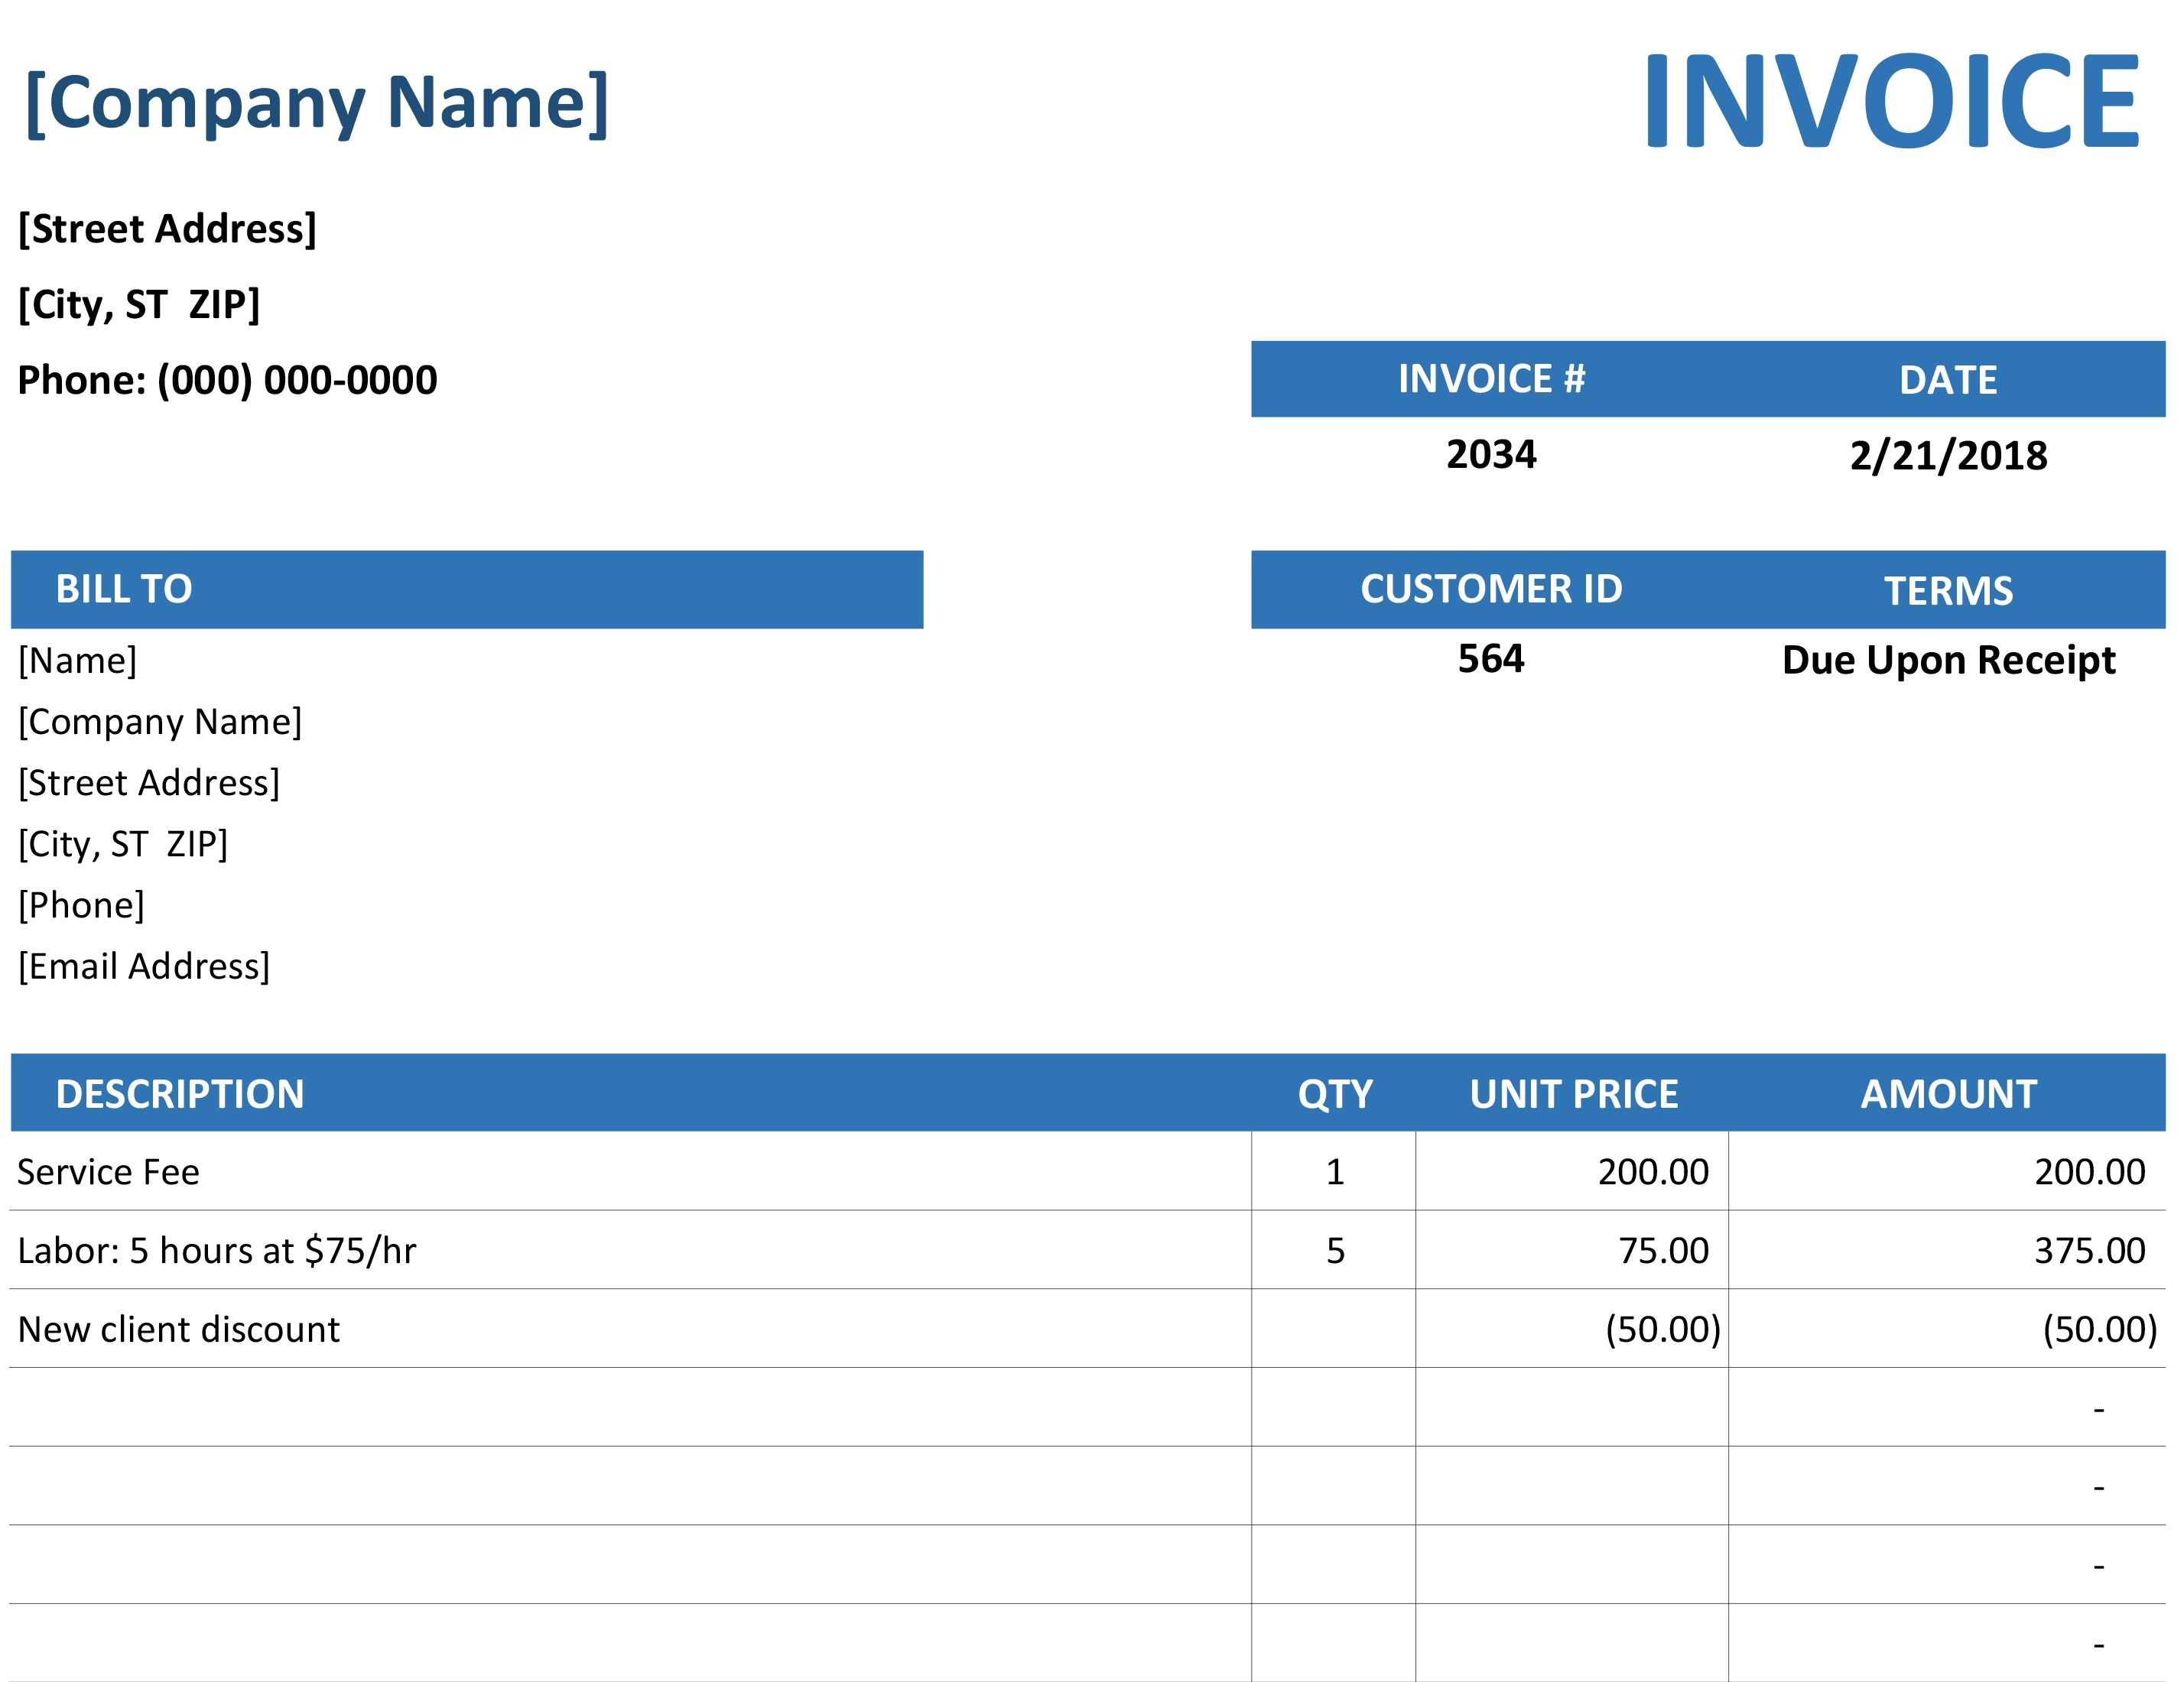 how-to-create-an-invoice-in-microsoft-word-adddax